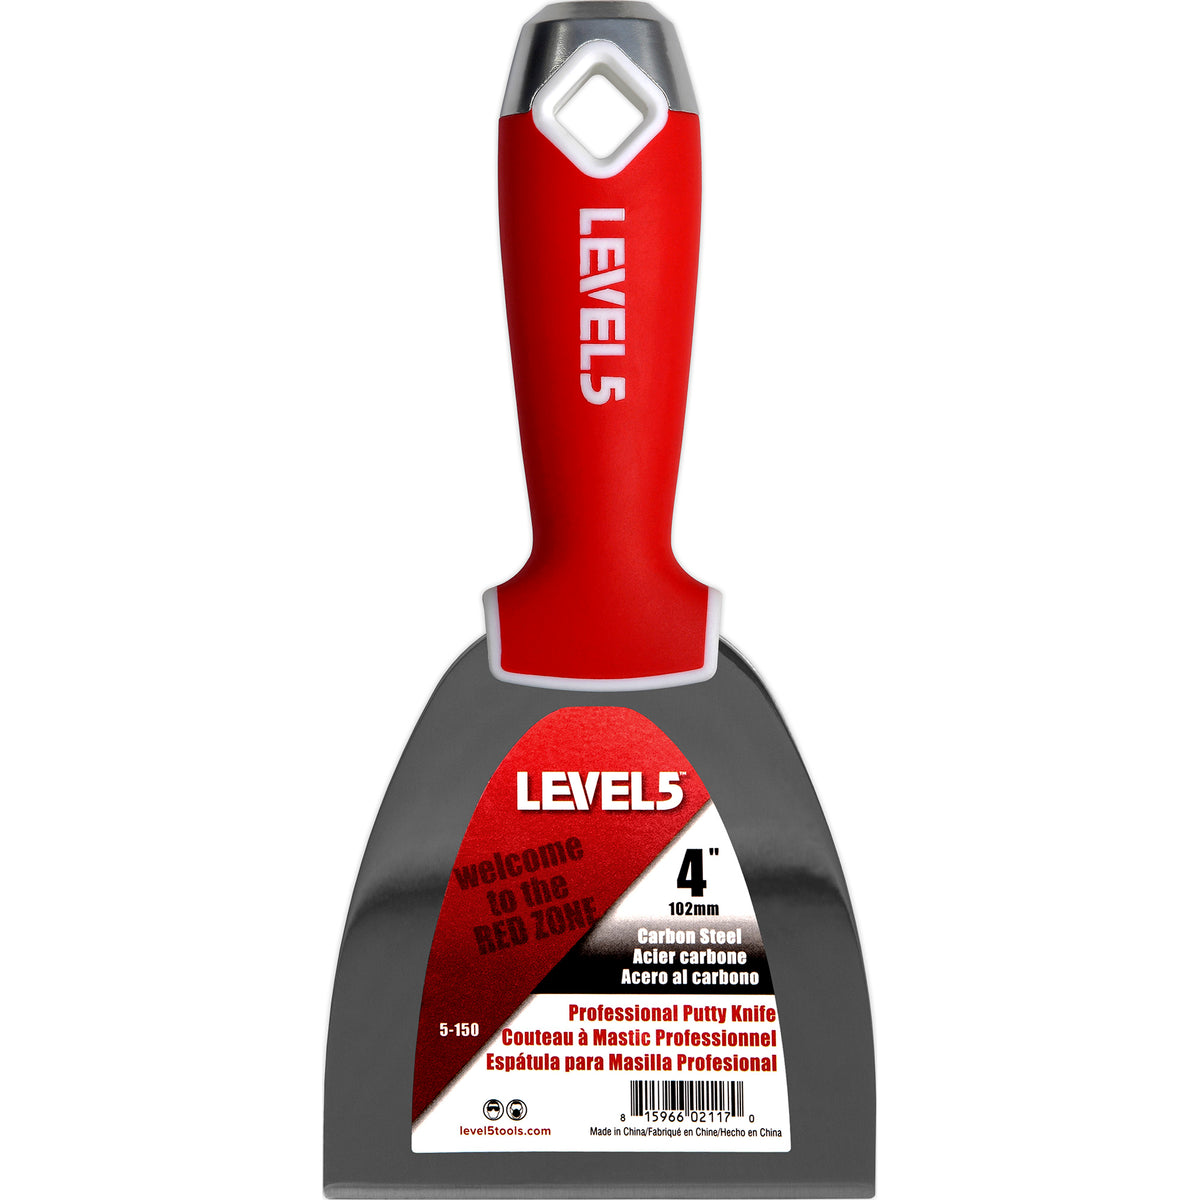 Level 5 Carbon Steel Putty Knife